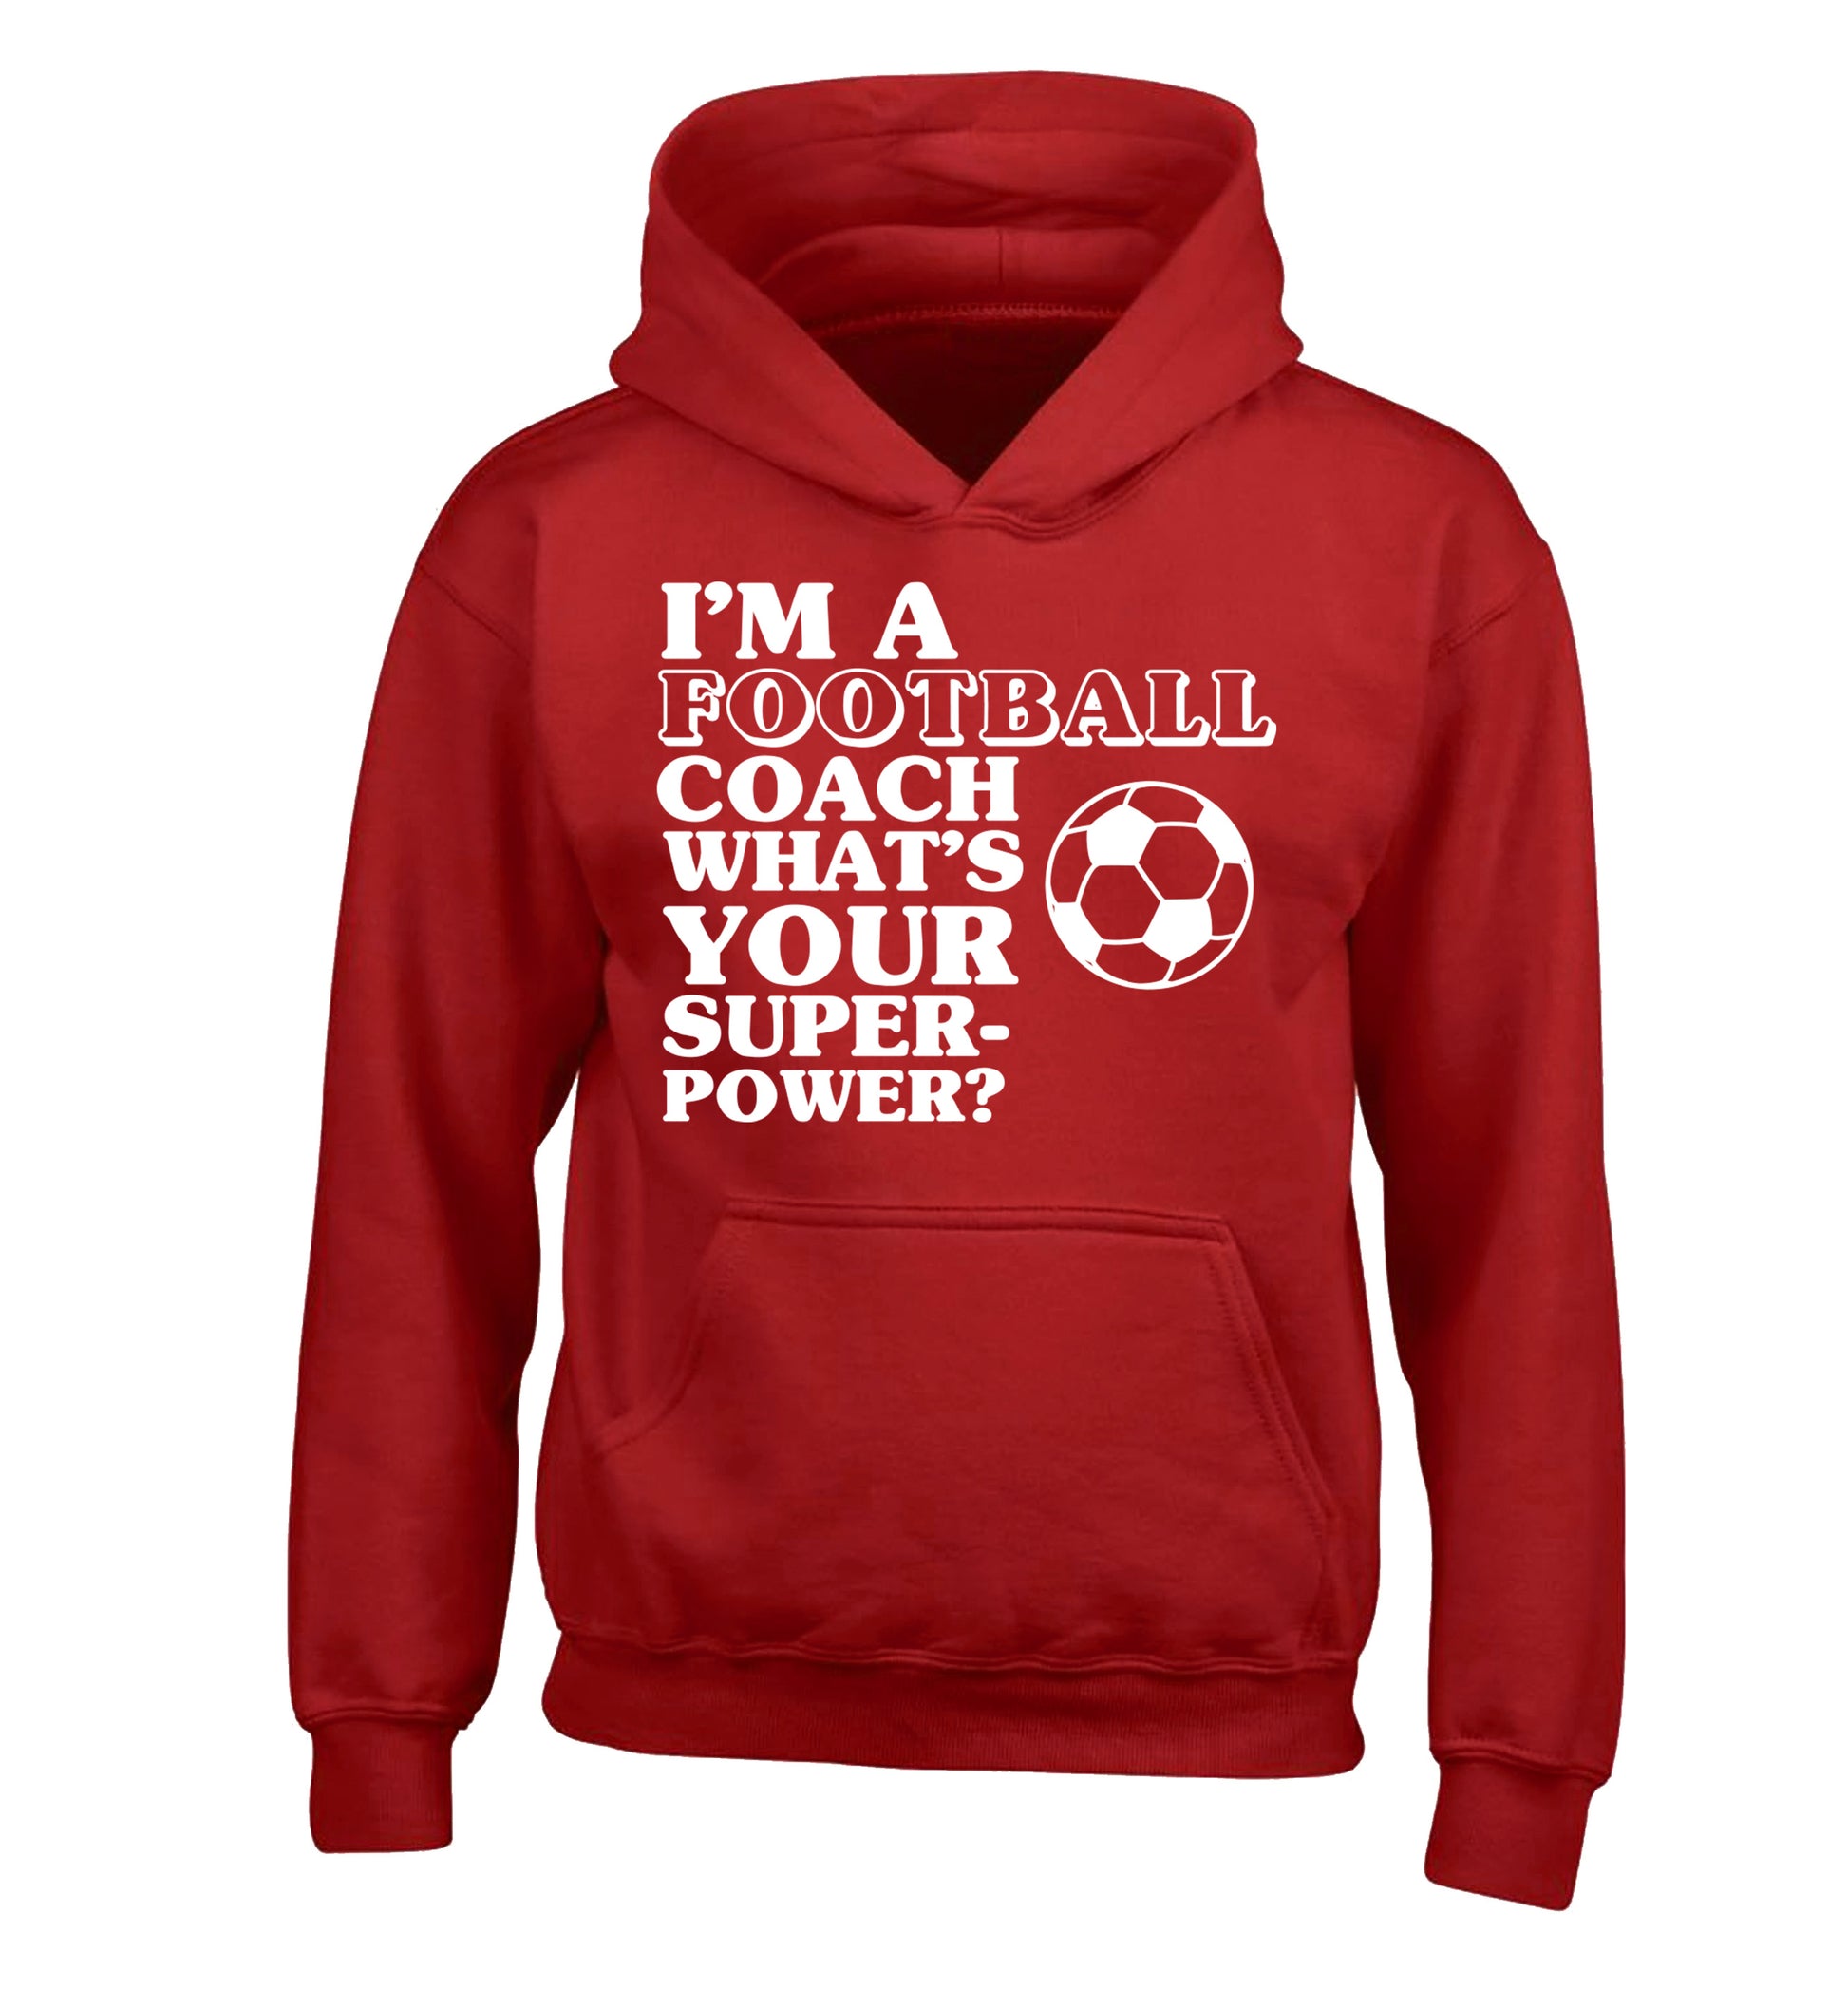 I'm a football coach what's your superpower? children's red hoodie 12-14 Years